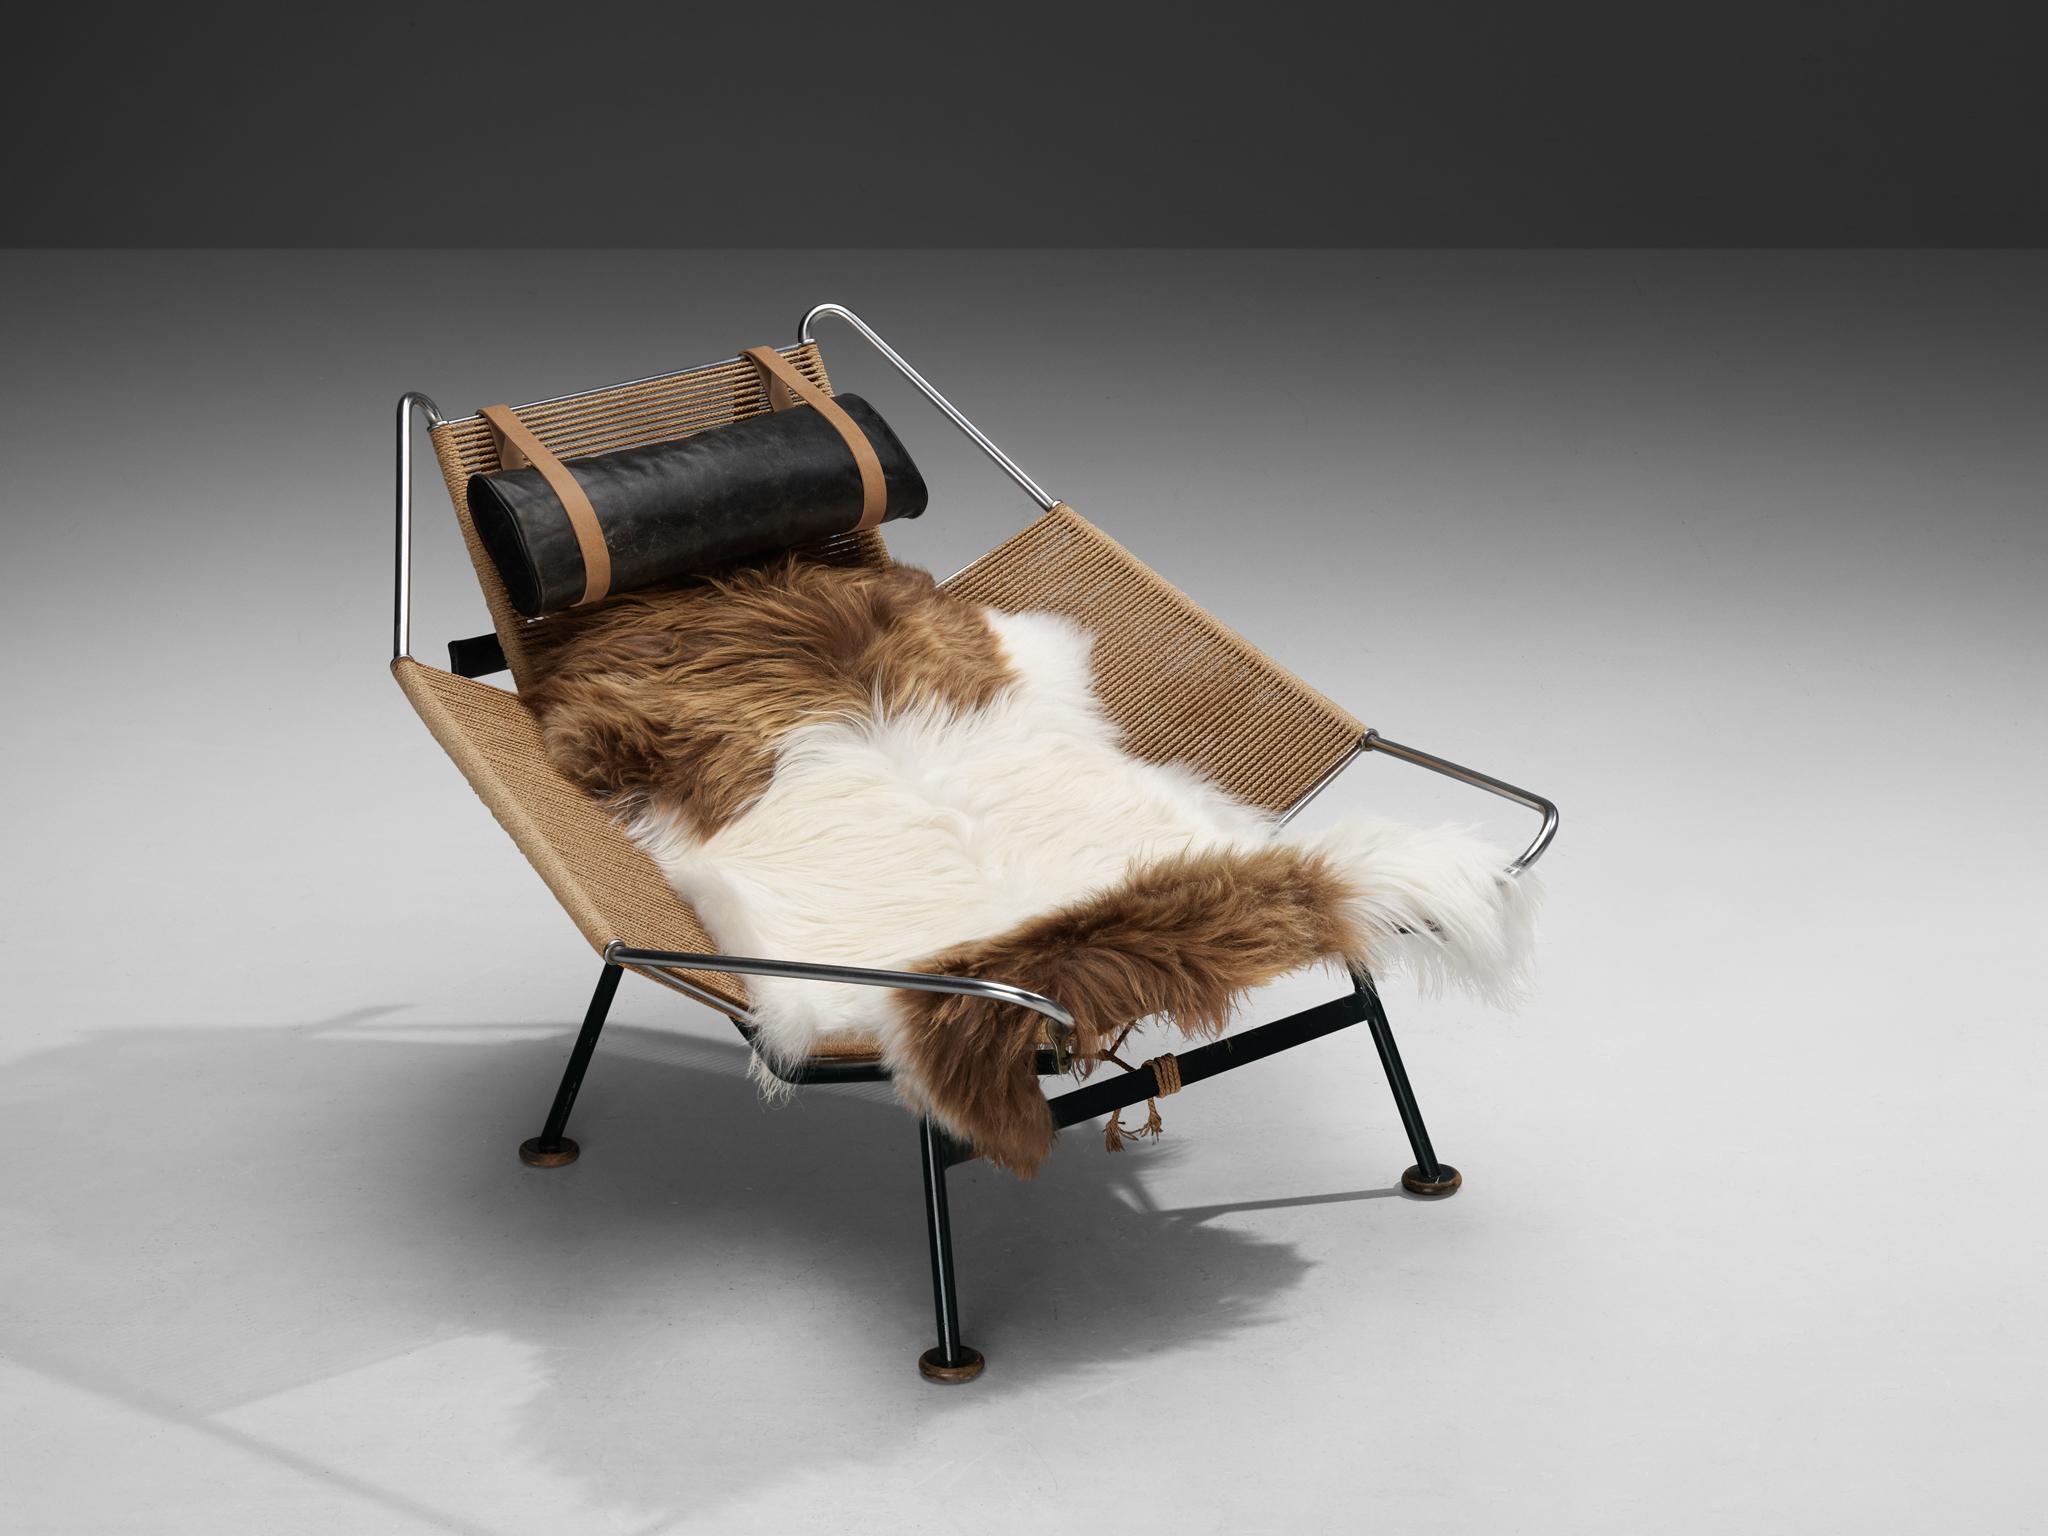 Hans J. Wegner, ‘Flag Halyard’ lounge chair model ‘GE225’, rope, steel, dark green lacquered steel, leather, wood, sheepskin, Denmark, 1958

This iconic chair, made with 250 metres of rope, is designed by the Danish designer Hans Wegner. The name